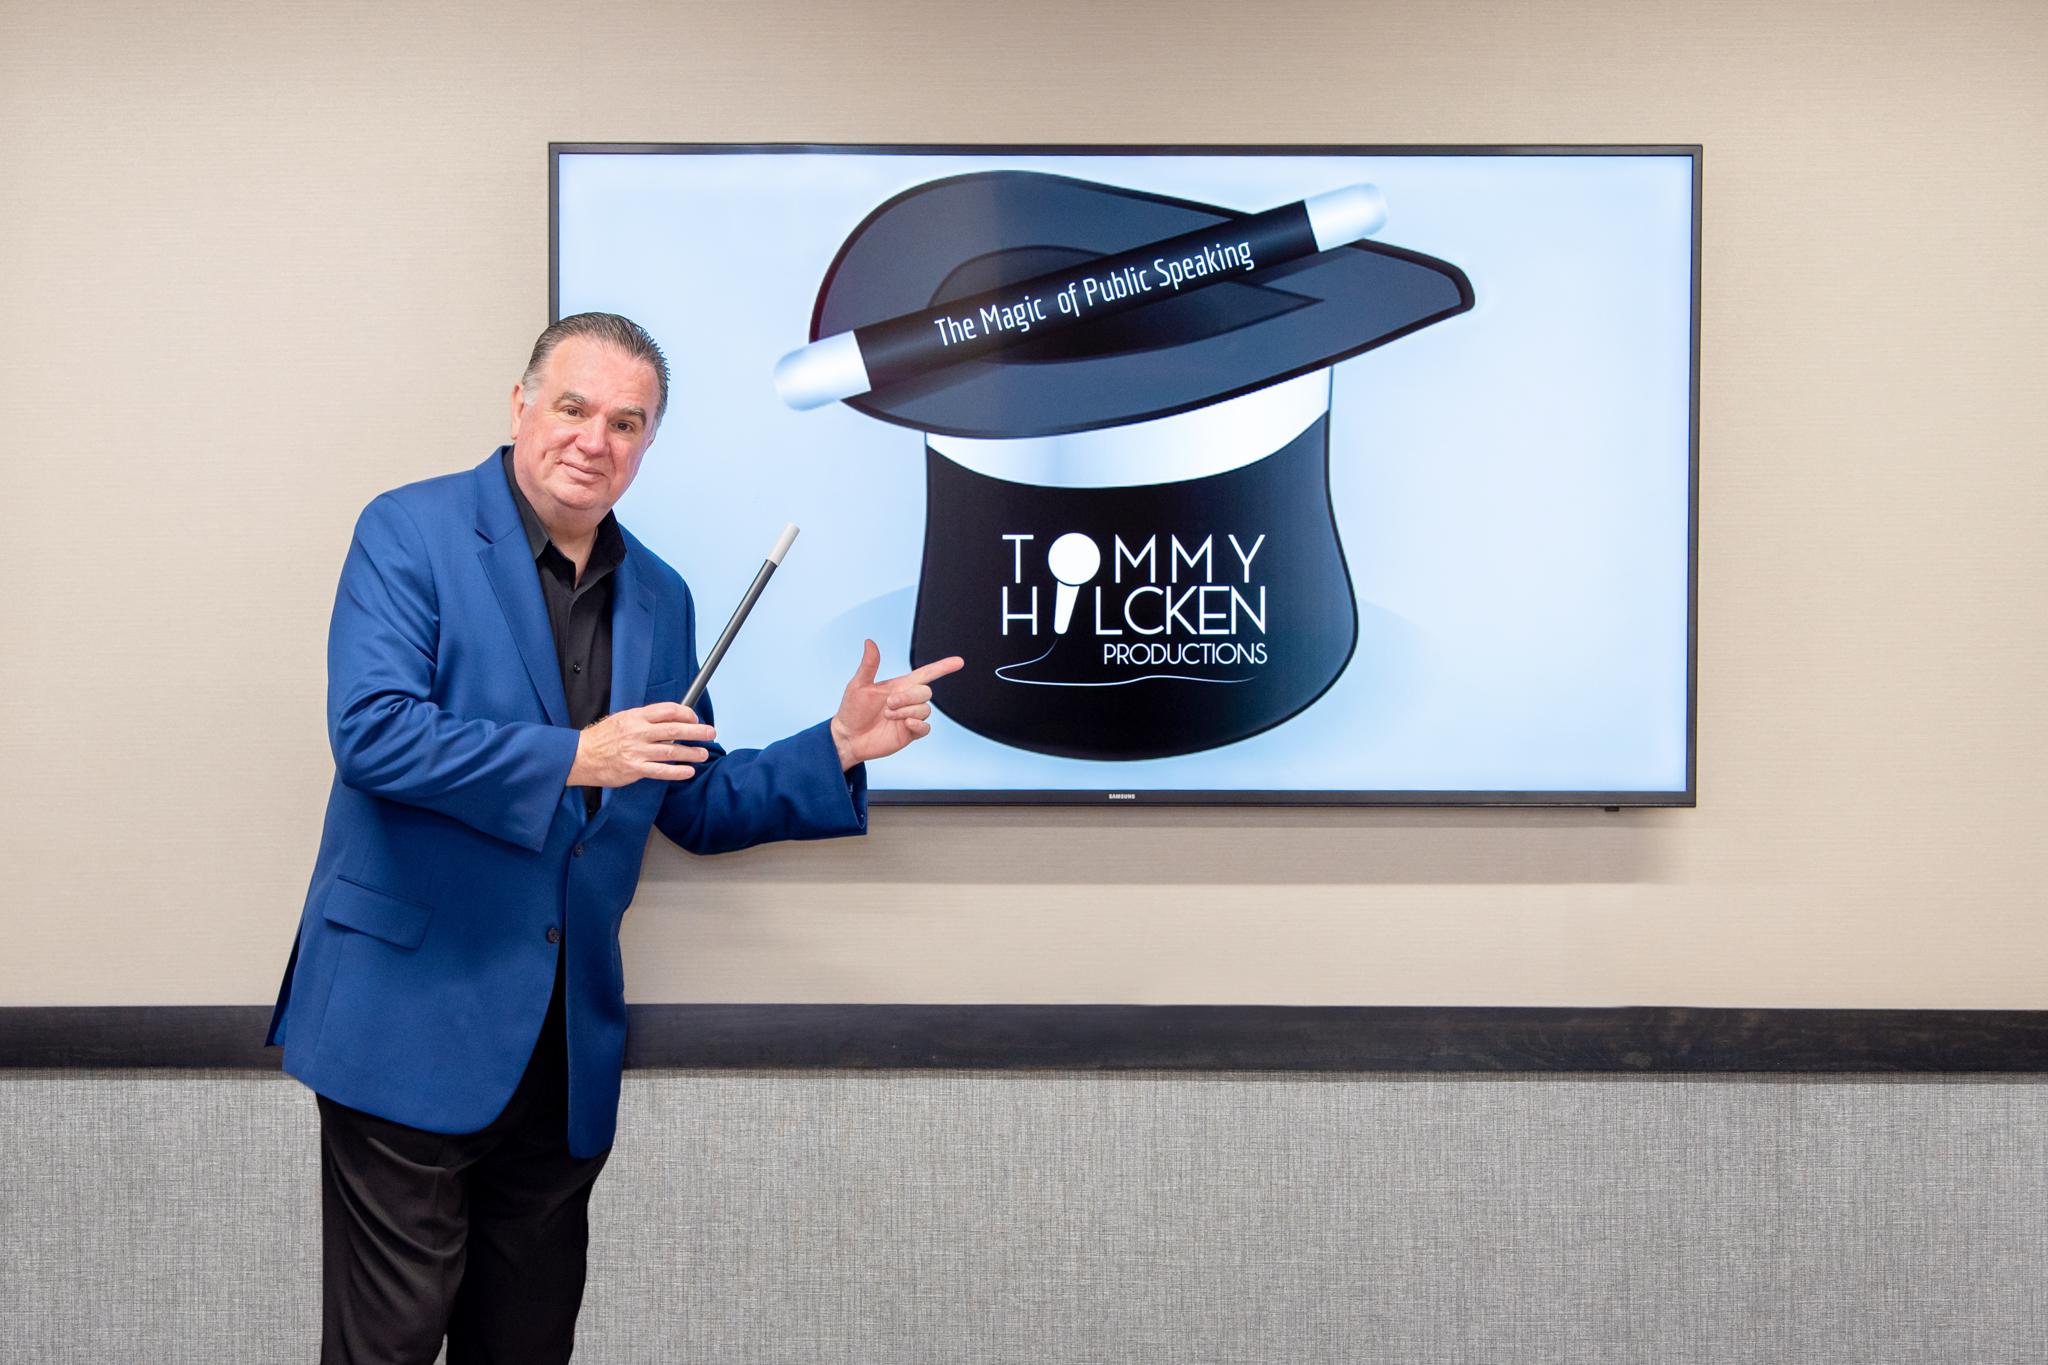 A man in a blue jacket holding a magic wand and pointing to the TV showing Tommy Hilcken Productions logo.